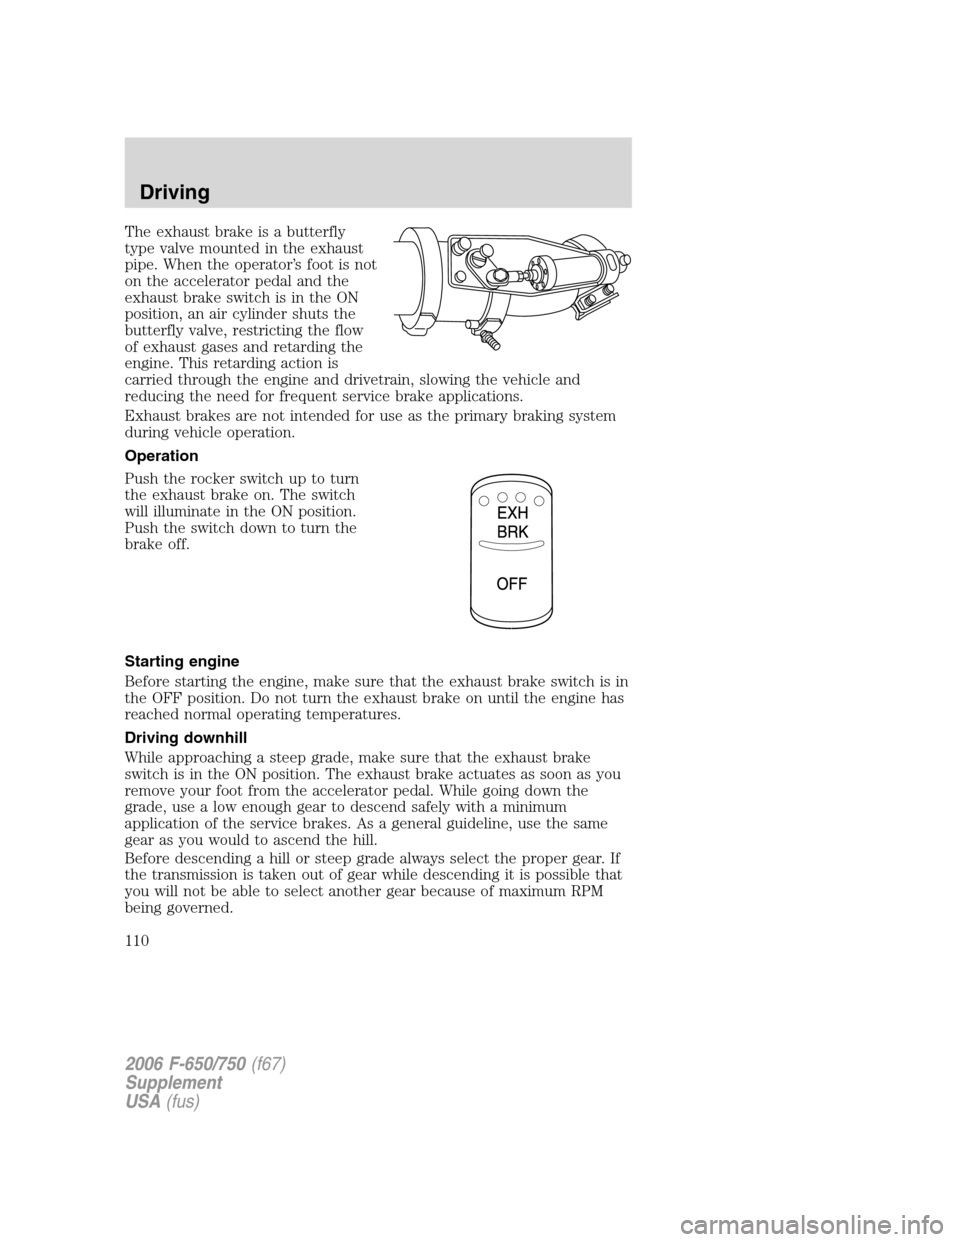 FORD F750 2006 11.G Owners Manual The exhaust brake is a butterfly
type valve mounted in the exhaust
pipe. When the operator’s foot is not
on the accelerator pedal and the
exhaust brake switch is in the ON
position, an air cylinder 